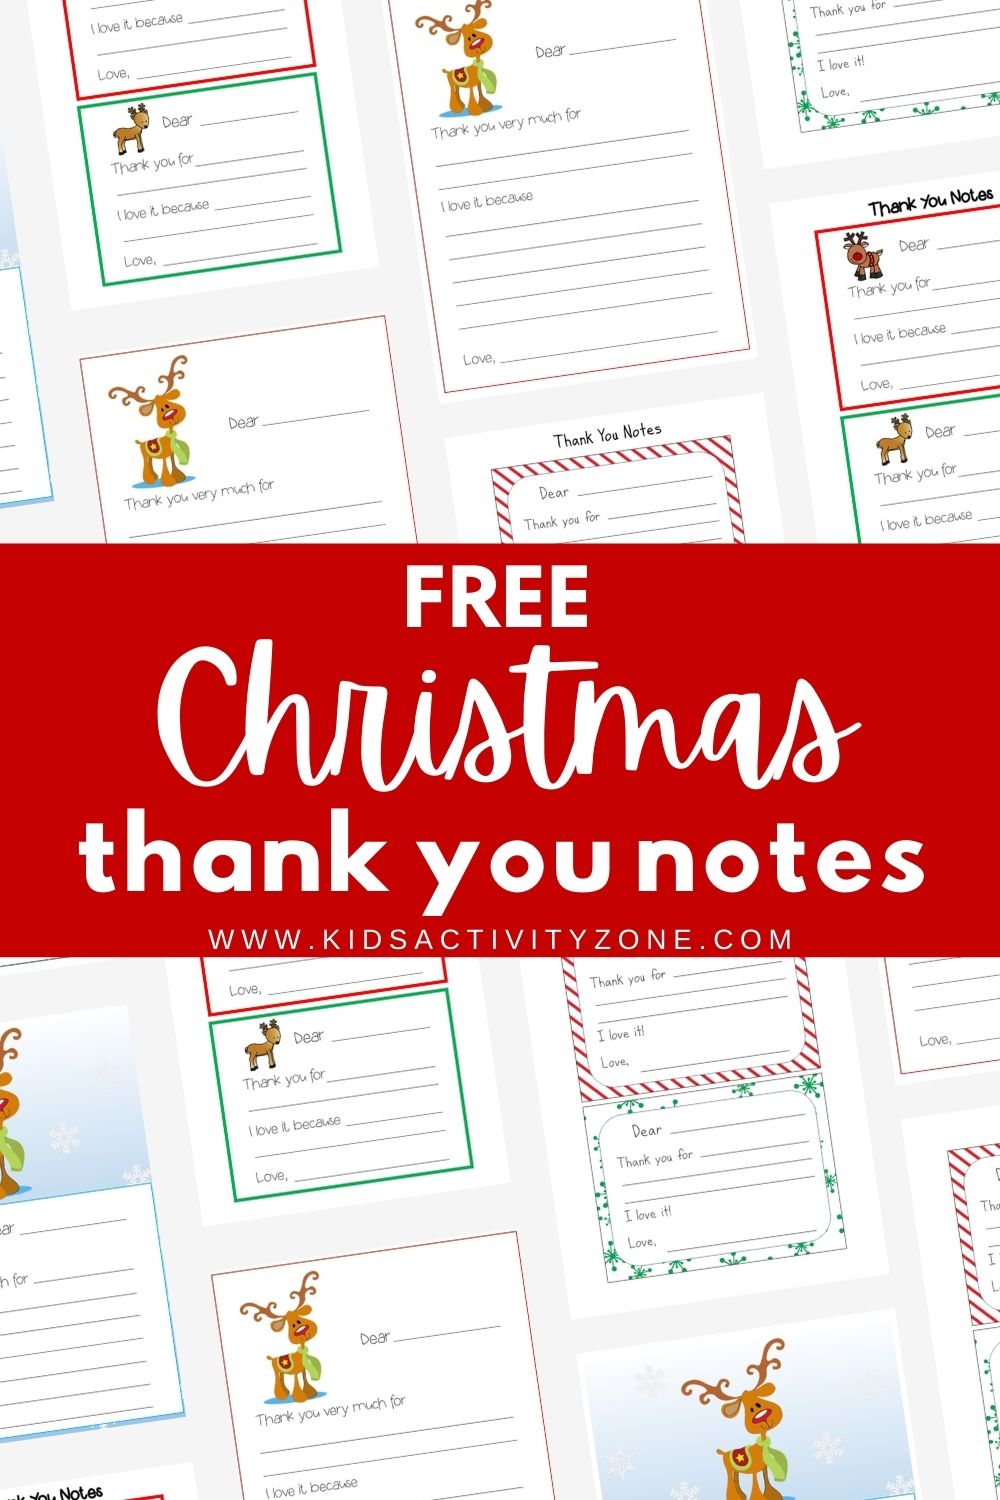 These Christmas Letter Cards are perfect for young children. Simply print the free download and have them fill in the blanks. Great for young kids to practice their handwriting while showing gratitude!